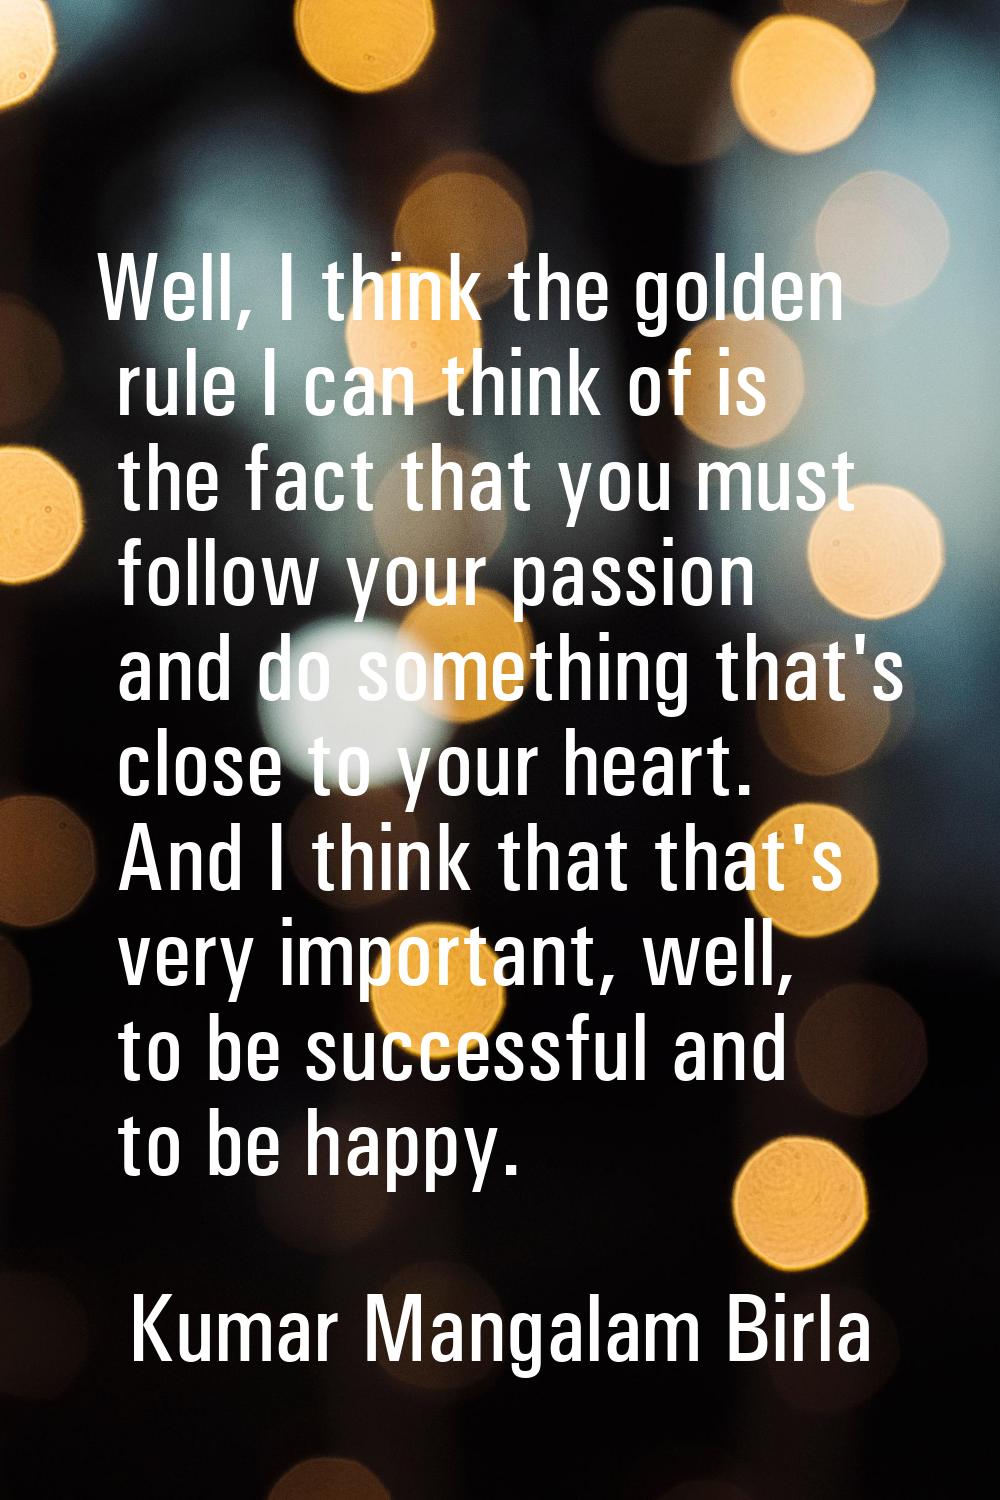 Well, I think the golden rule I can think of is the fact that you must follow your passion and do s